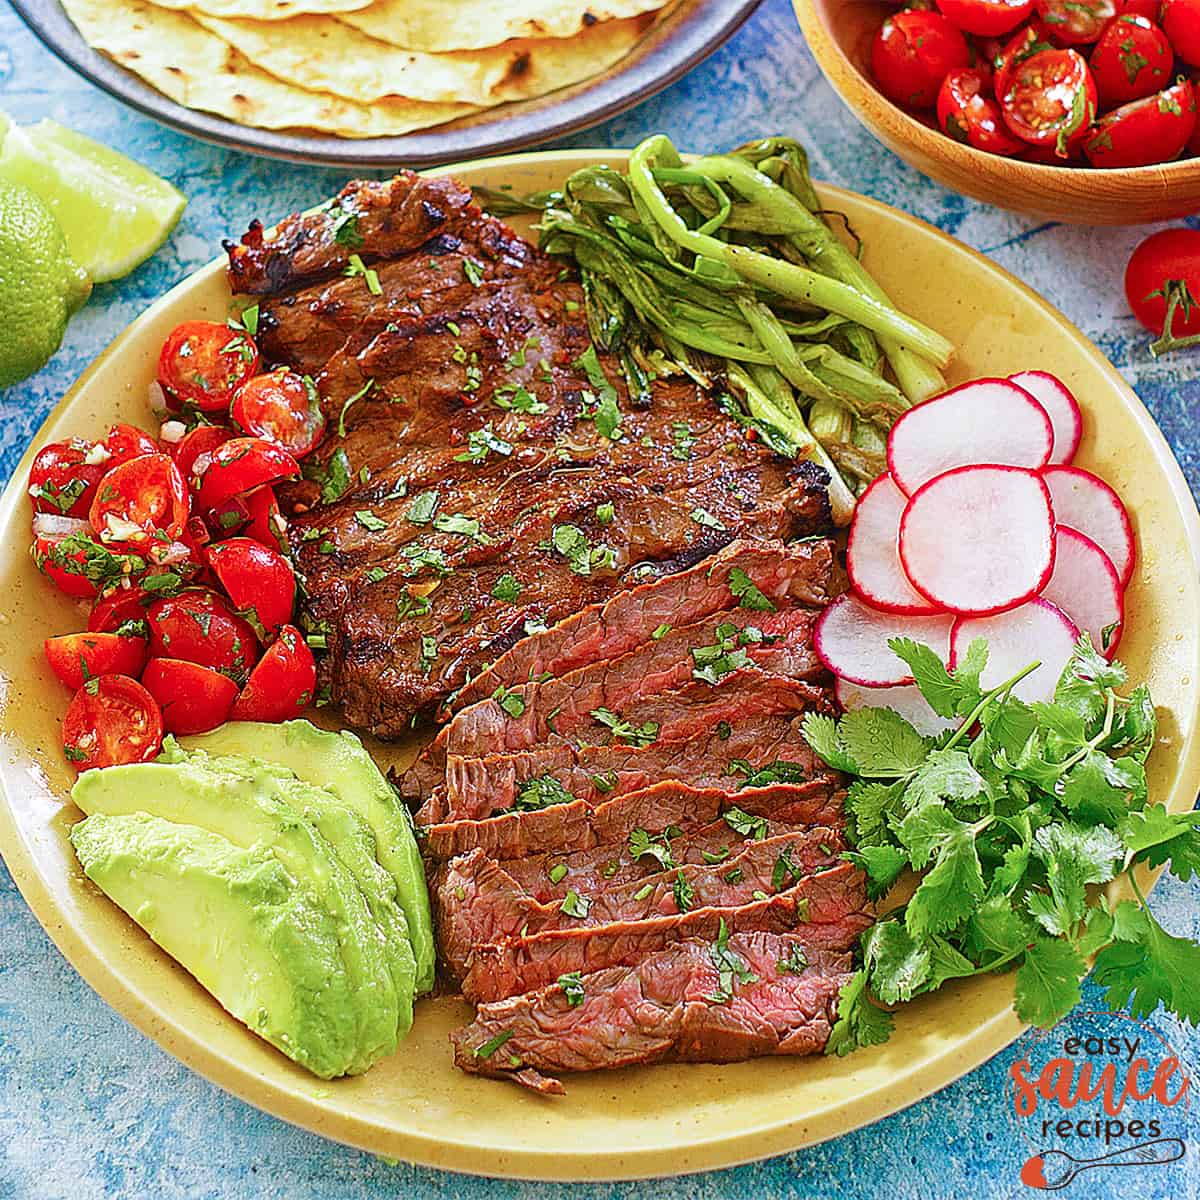 sliced carne asada meat on a plate with vegetables